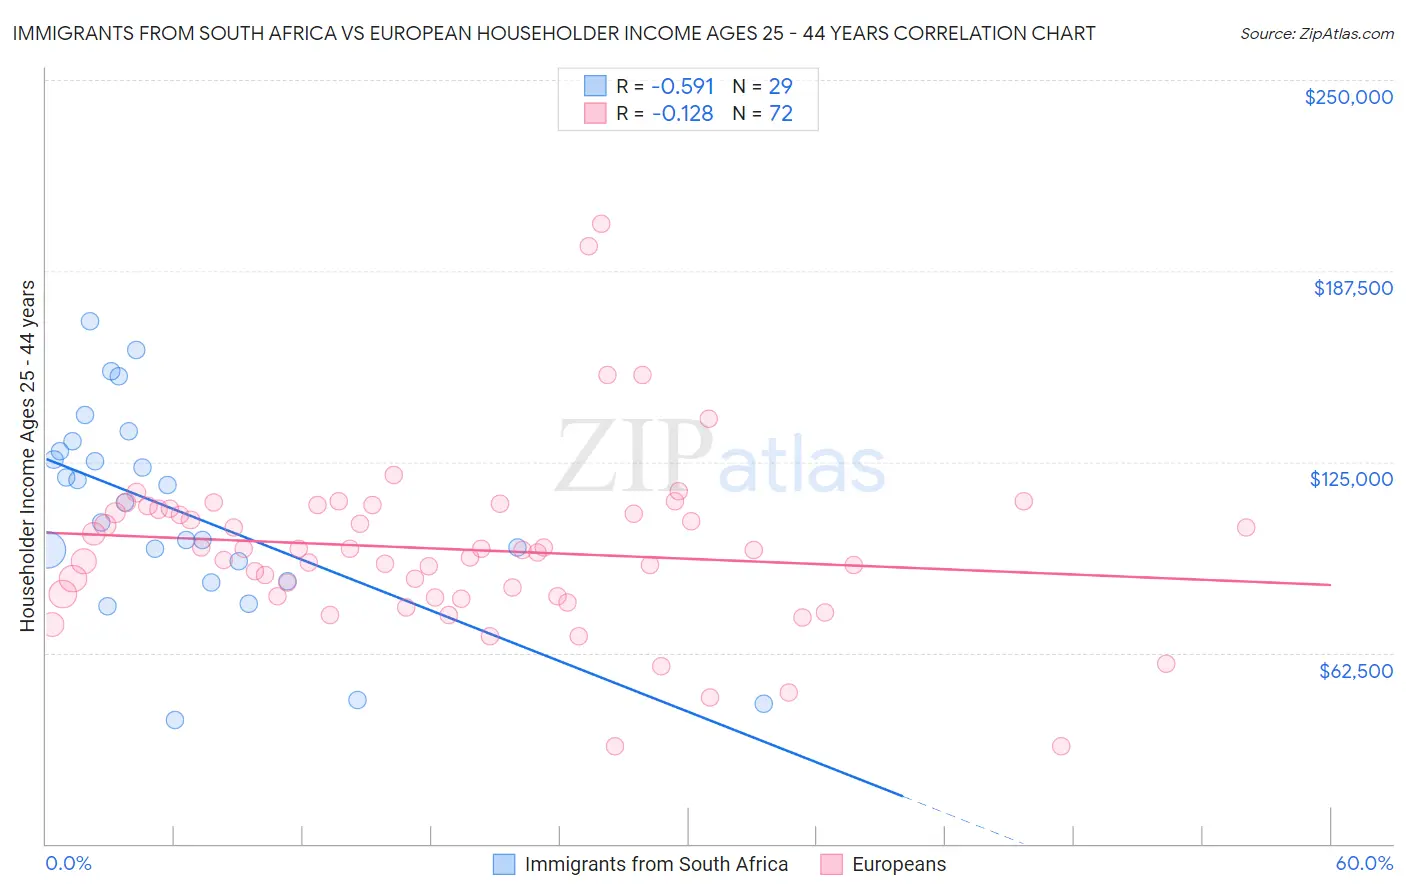 Immigrants from South Africa vs European Householder Income Ages 25 - 44 years